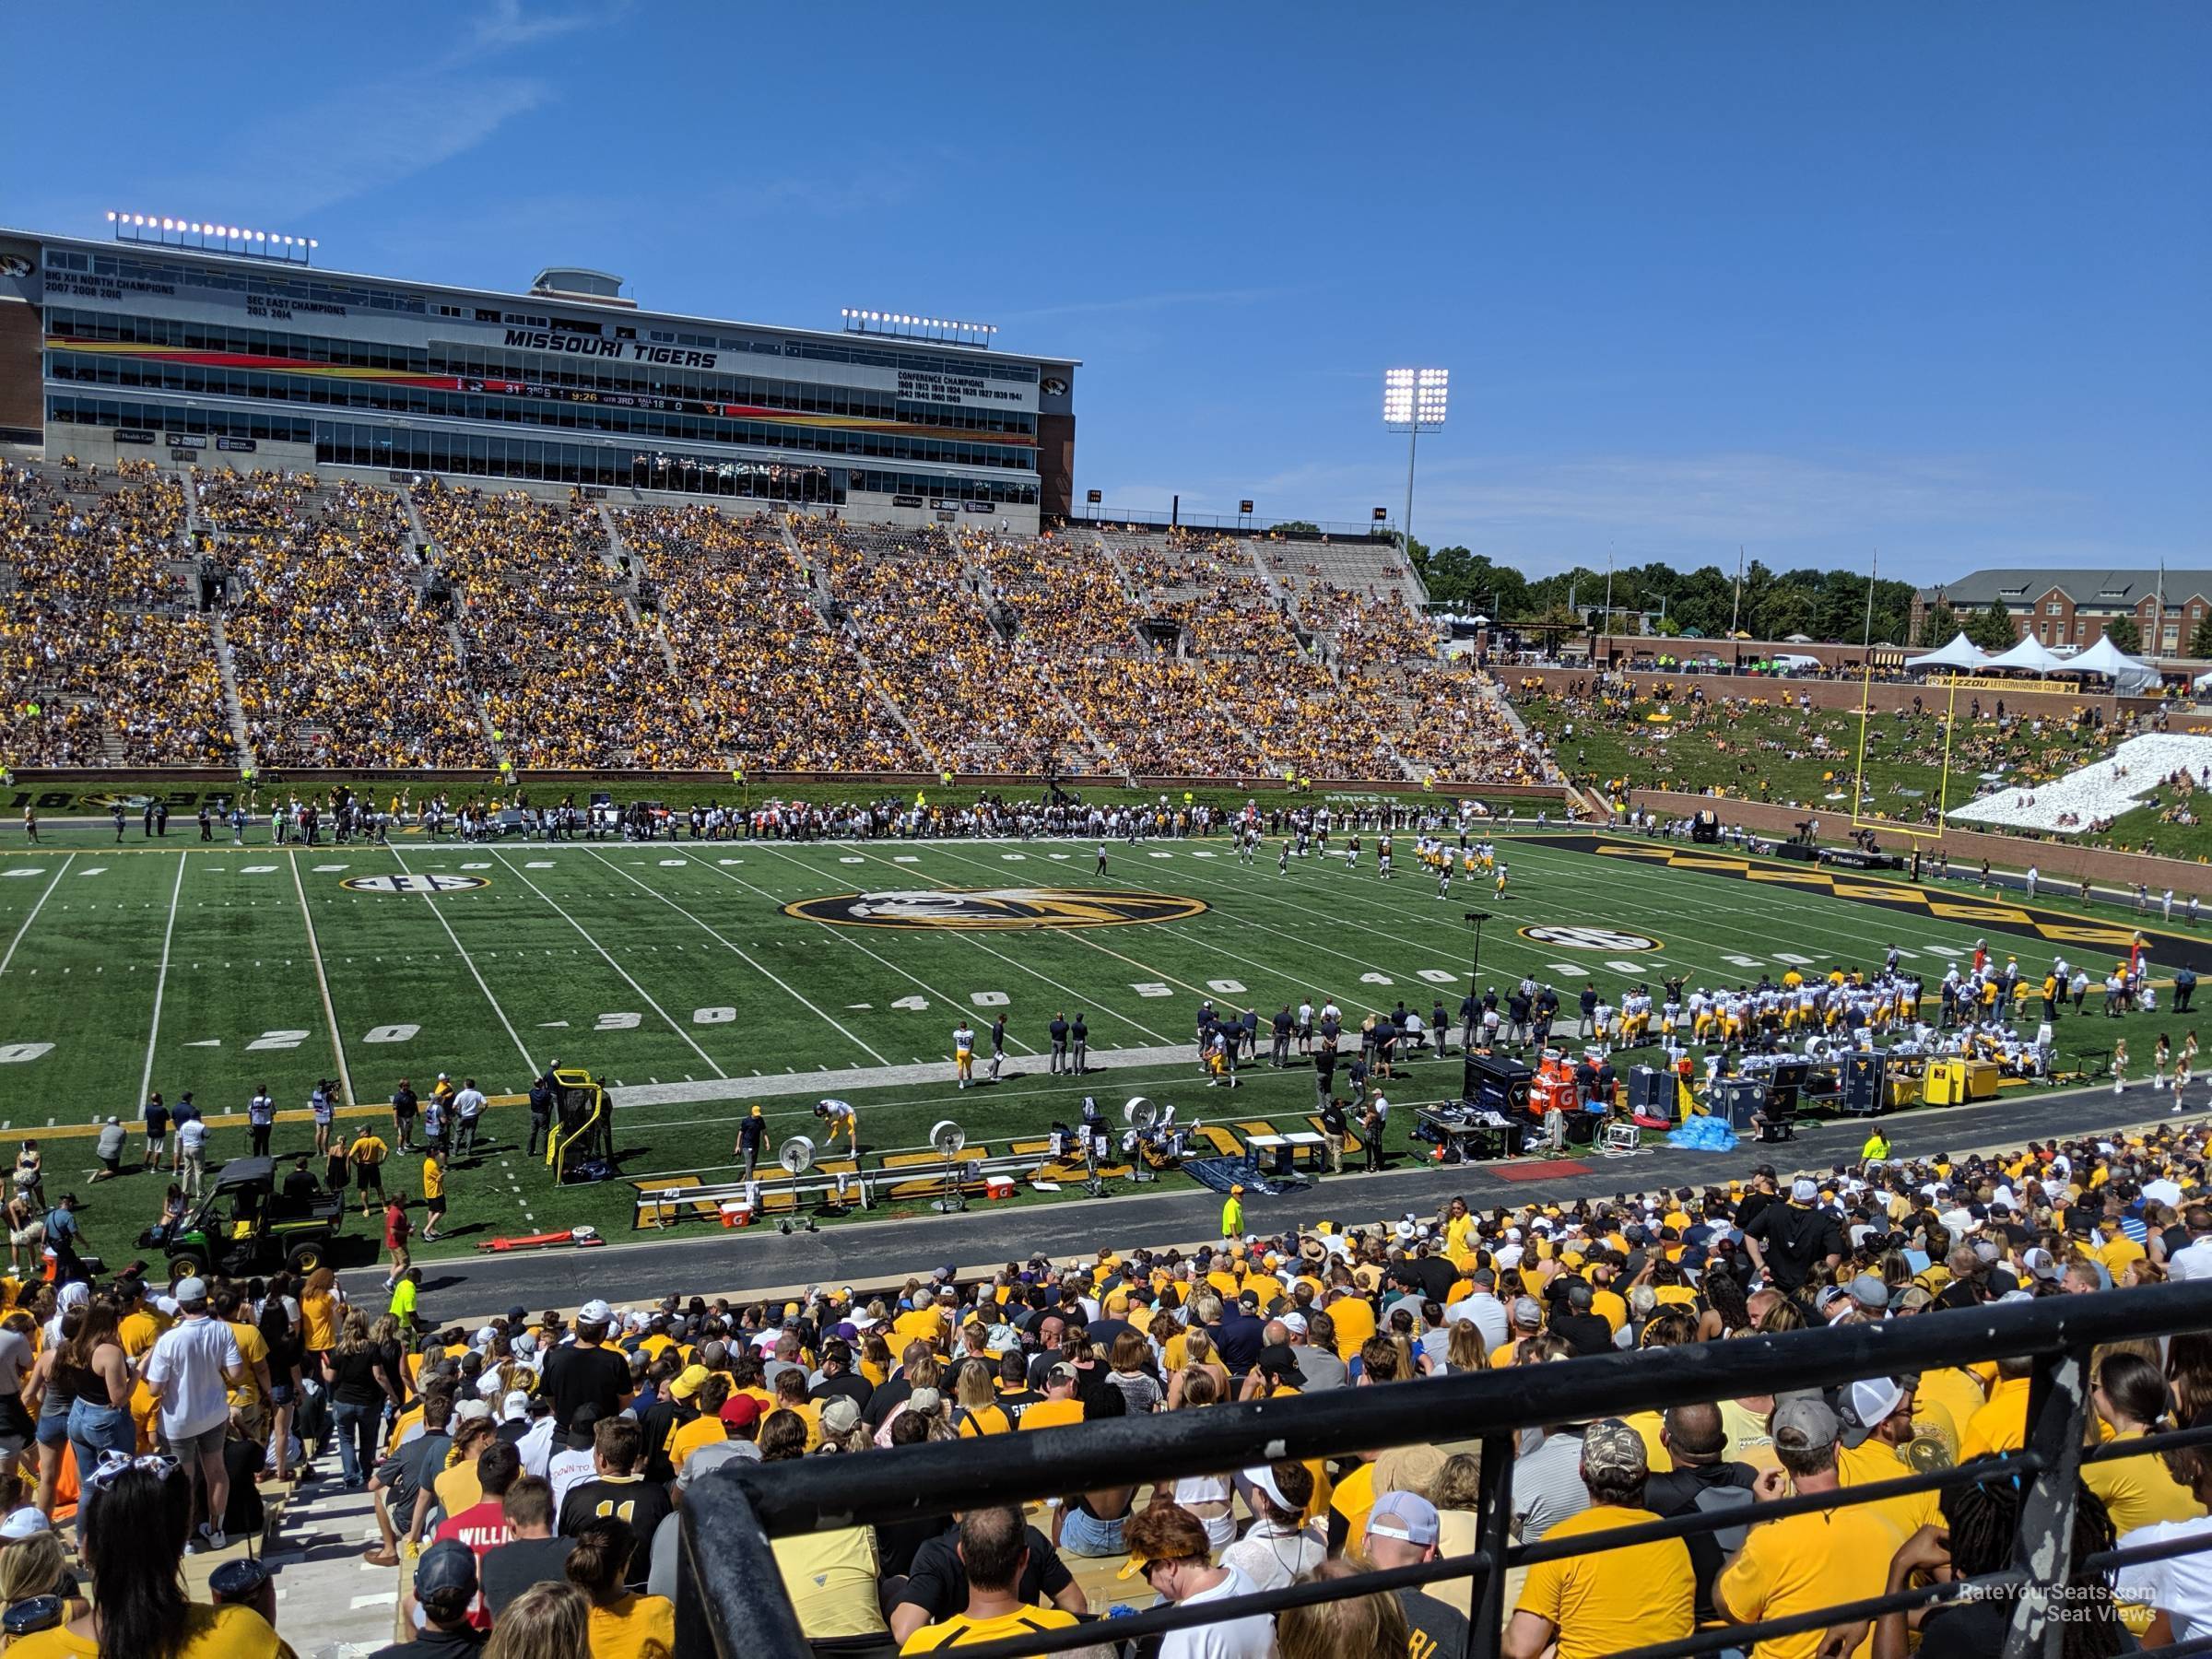 section 104, row 38 seat view  - faurot field